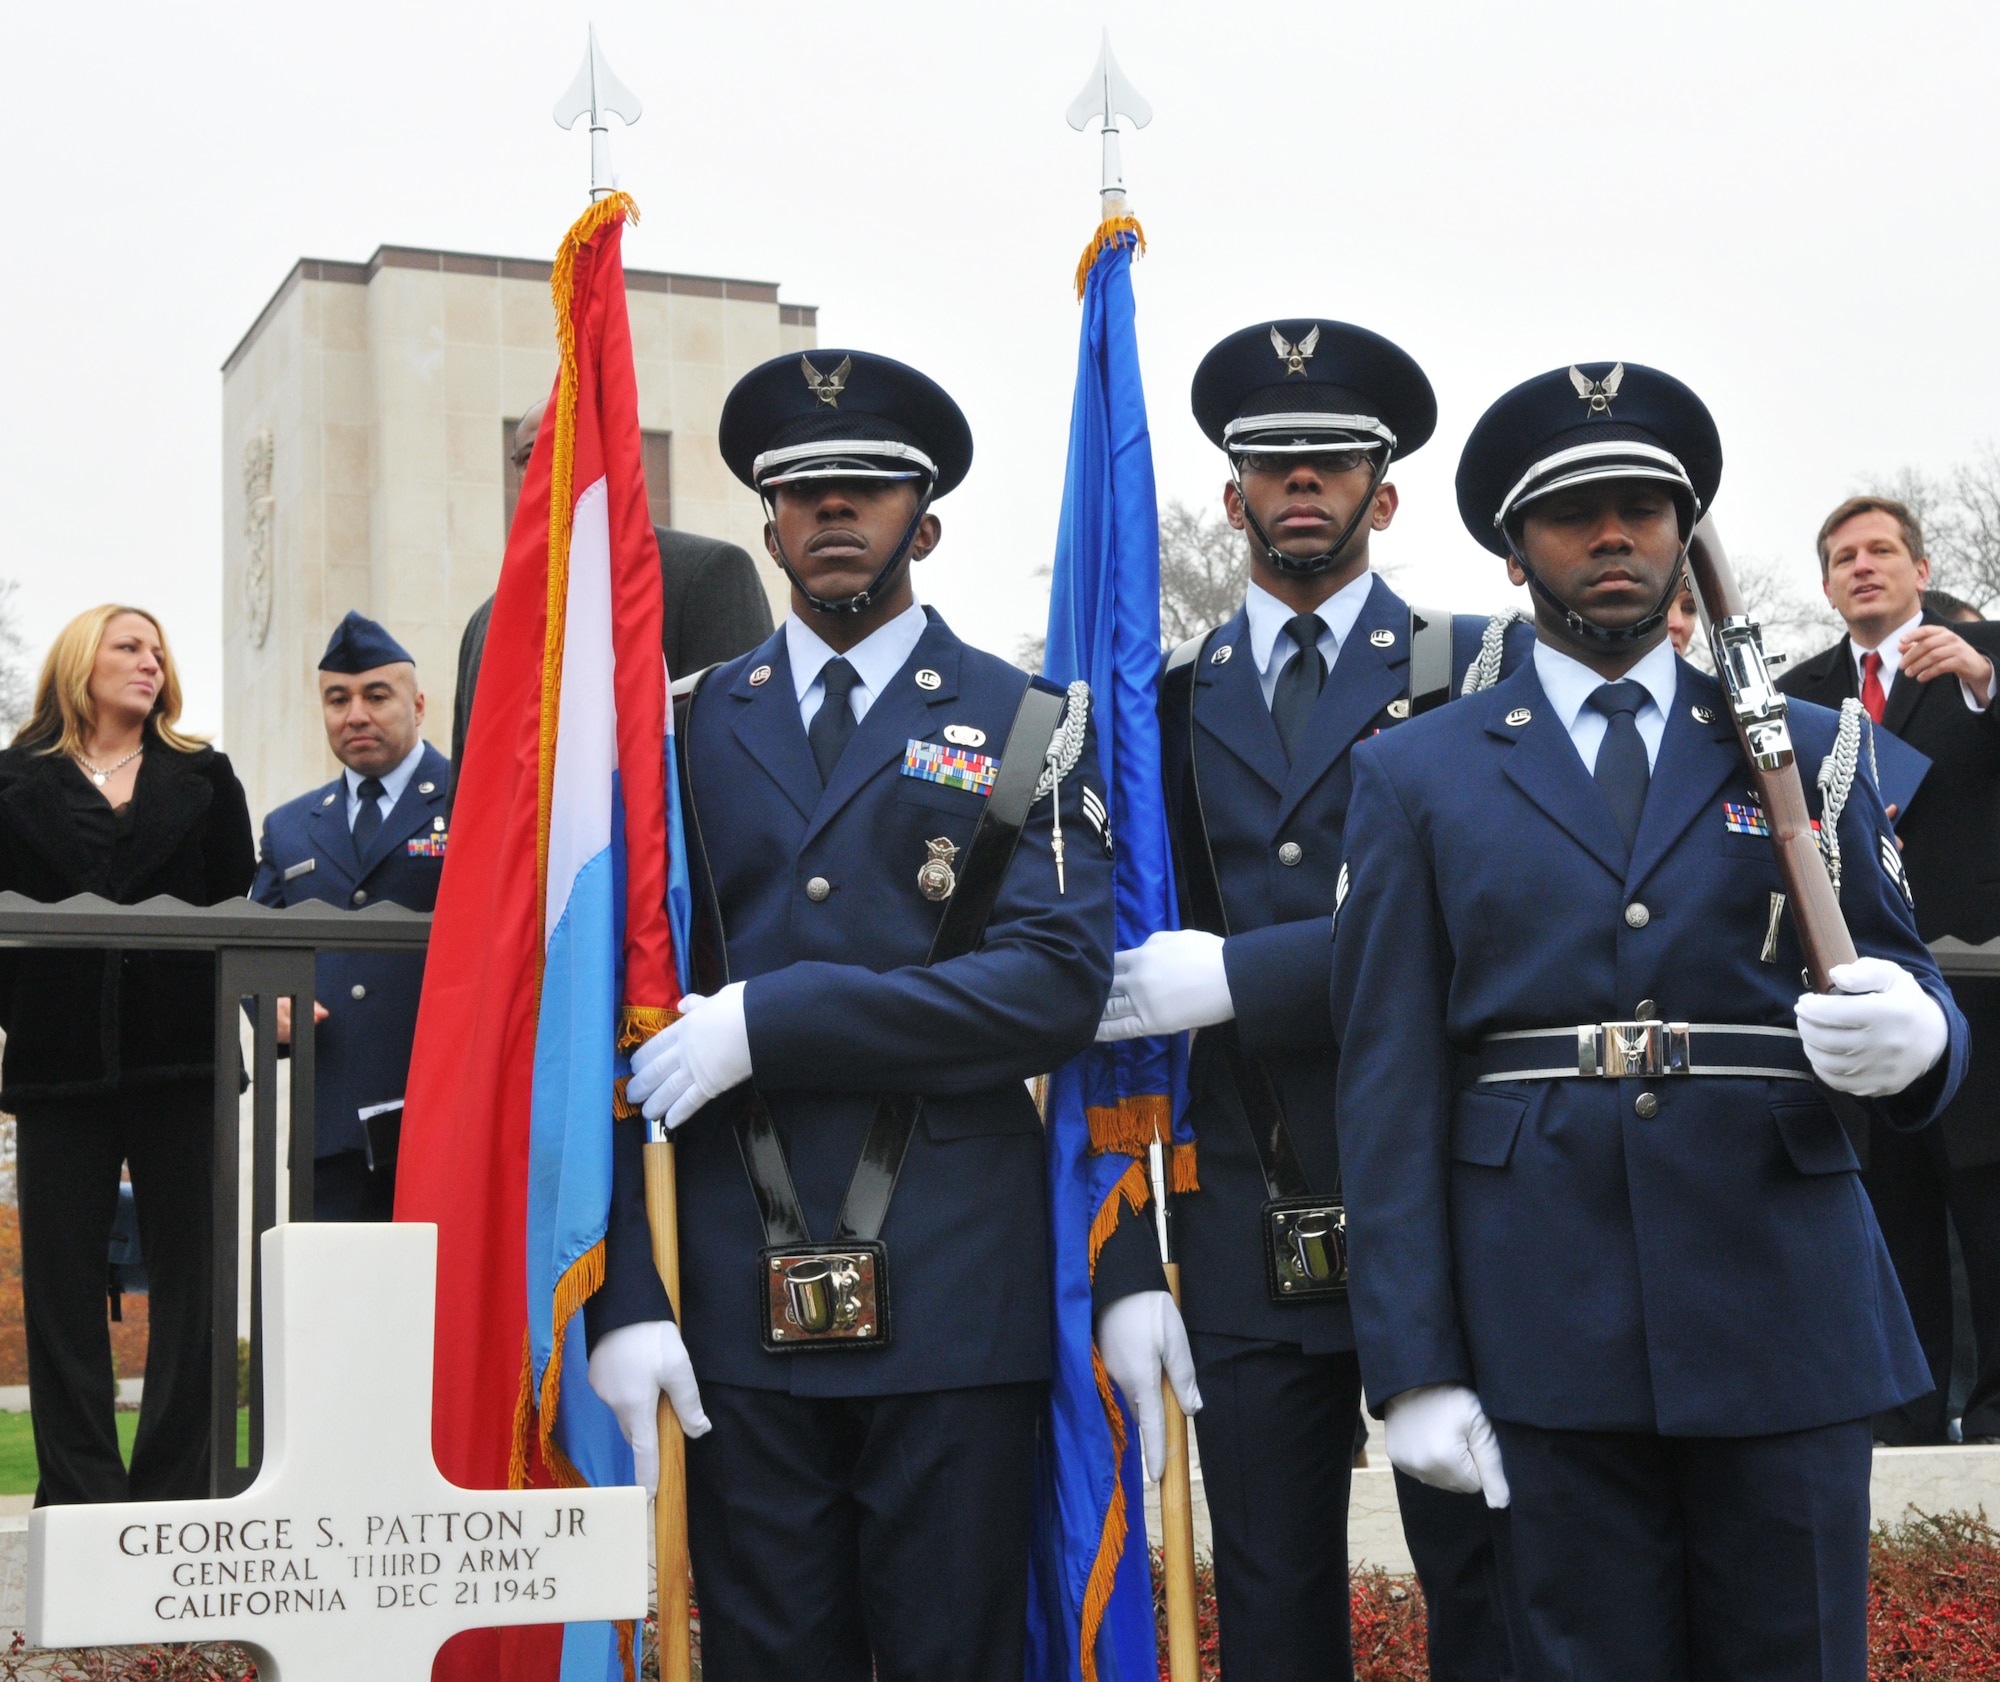 SPANGDAHLEM AIR BASE, Germany -- From left to right, Senior Airmen Jason Myers, Brandon Jackson, and Jerrime Williams, 702nd Munitions Support Squadron Color Guard members, stand at attention in front of the gravestone of Gen. George S. Patton Jr., Third Army commander during World War II, during the annual Veterans Day ceremony at the Luxembourg American Cemetery and Memorial in Luxembourg City Nov. 11. The 50.5 acre cemetery, which is one of 14 American cemeteries established overseas after World War II, contains the remains of more than 5,000 American servicemembers who died fighting in World War II. (U.S. Air Force photo/Maj. Jillian Torango)